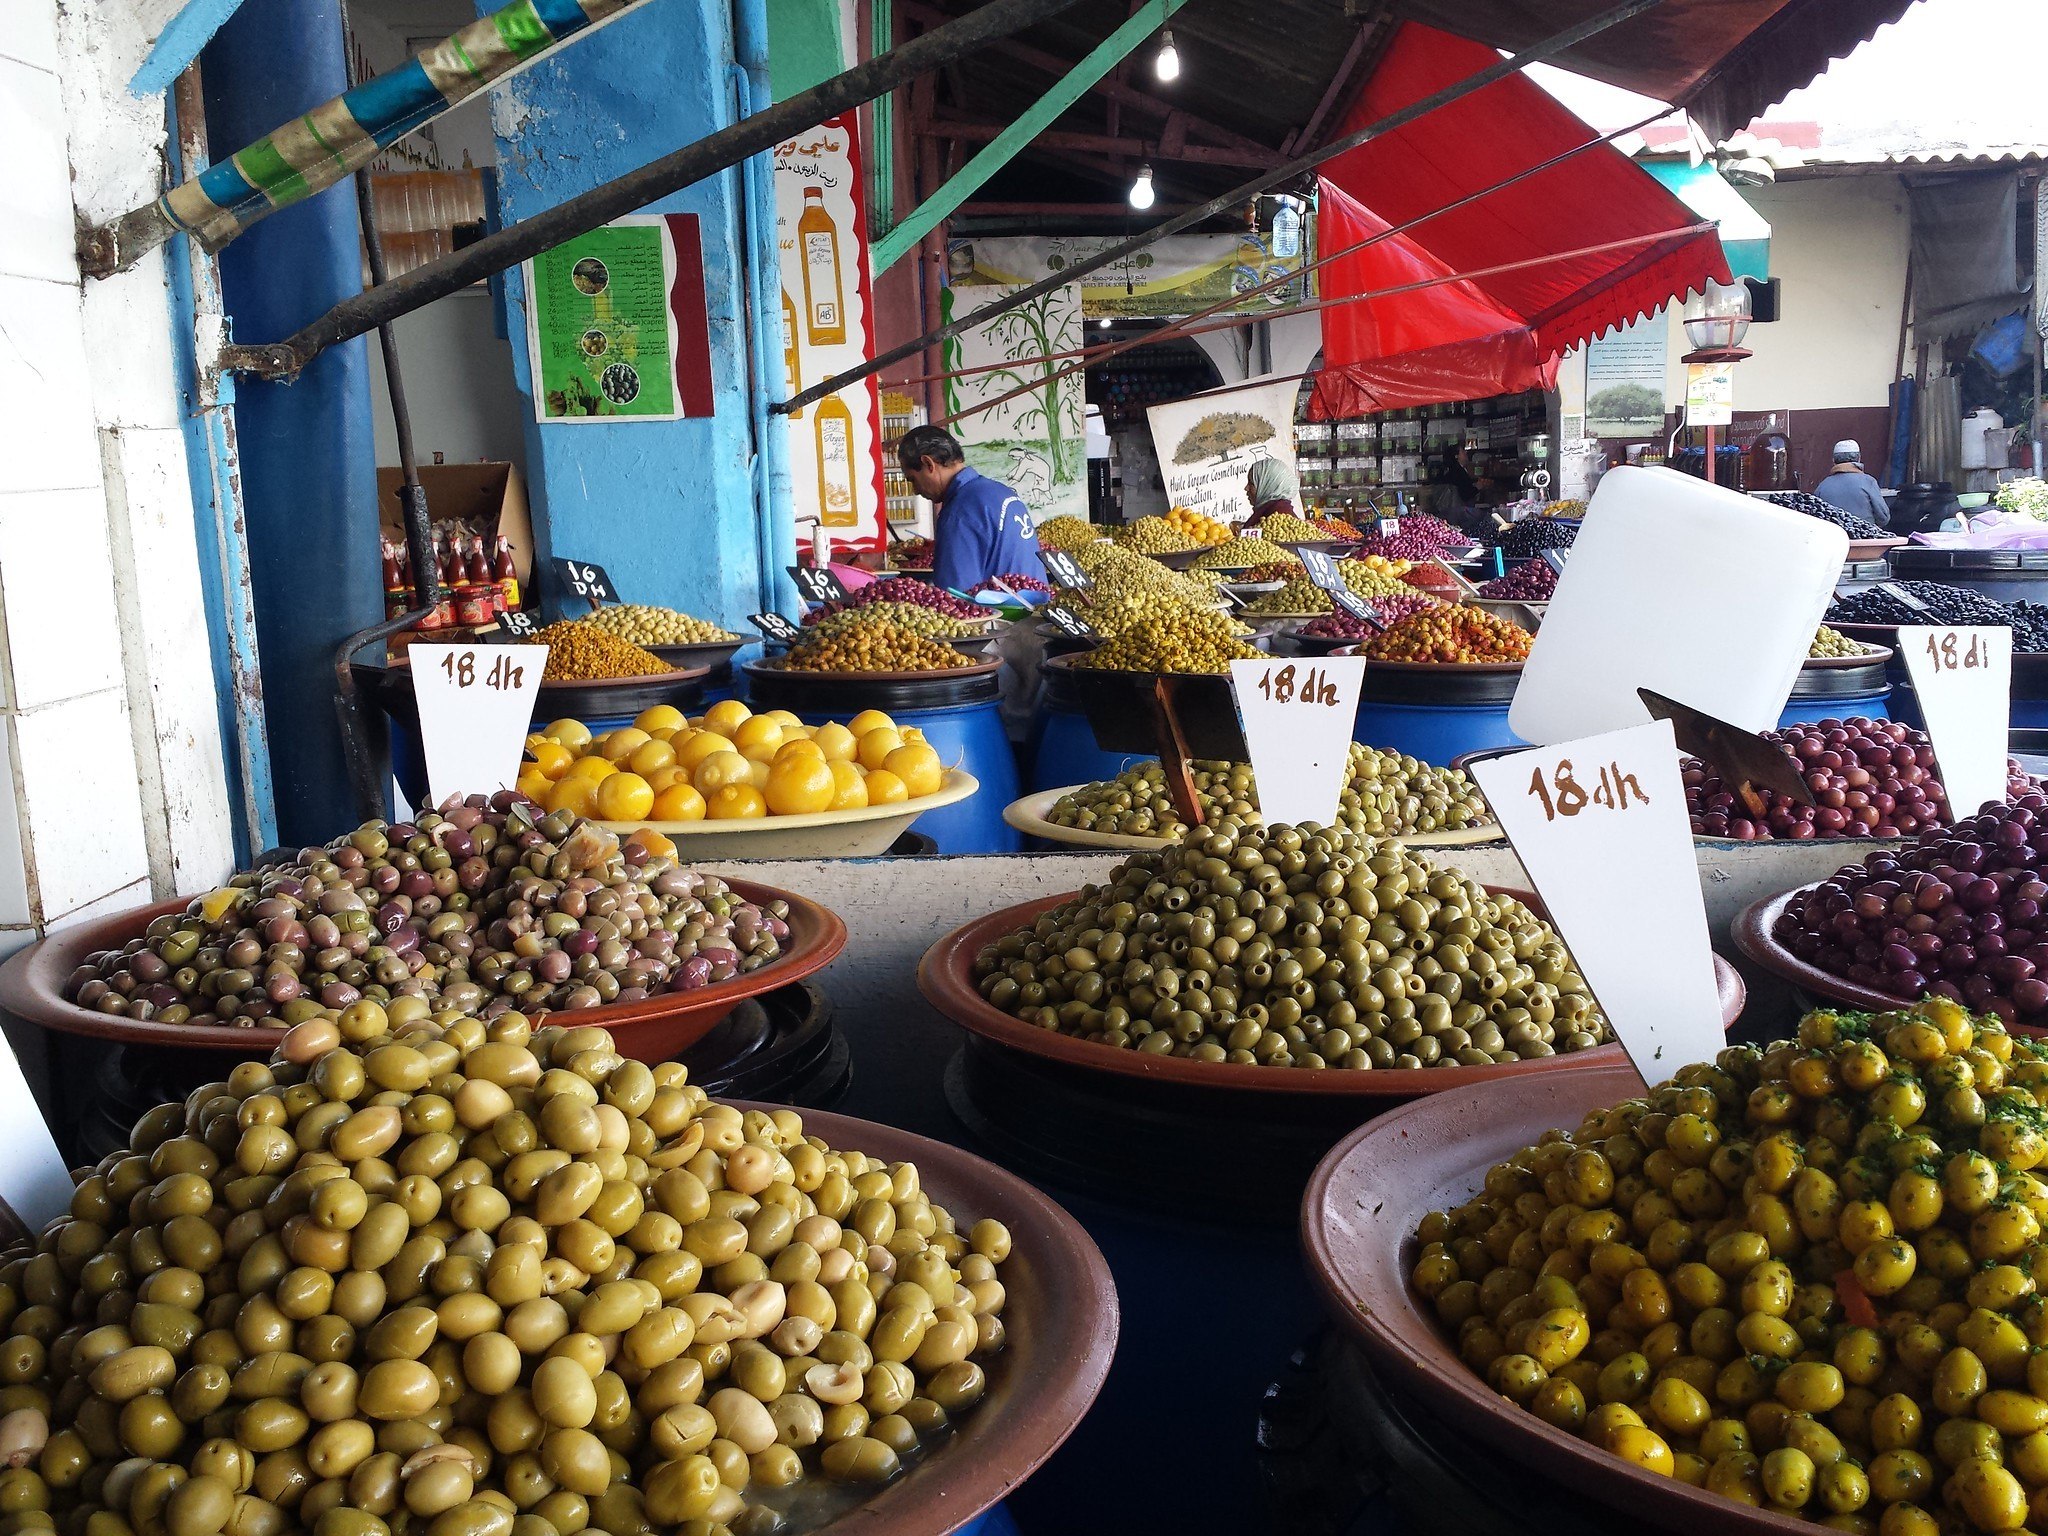 Casablanca Market by hewy on Flickr